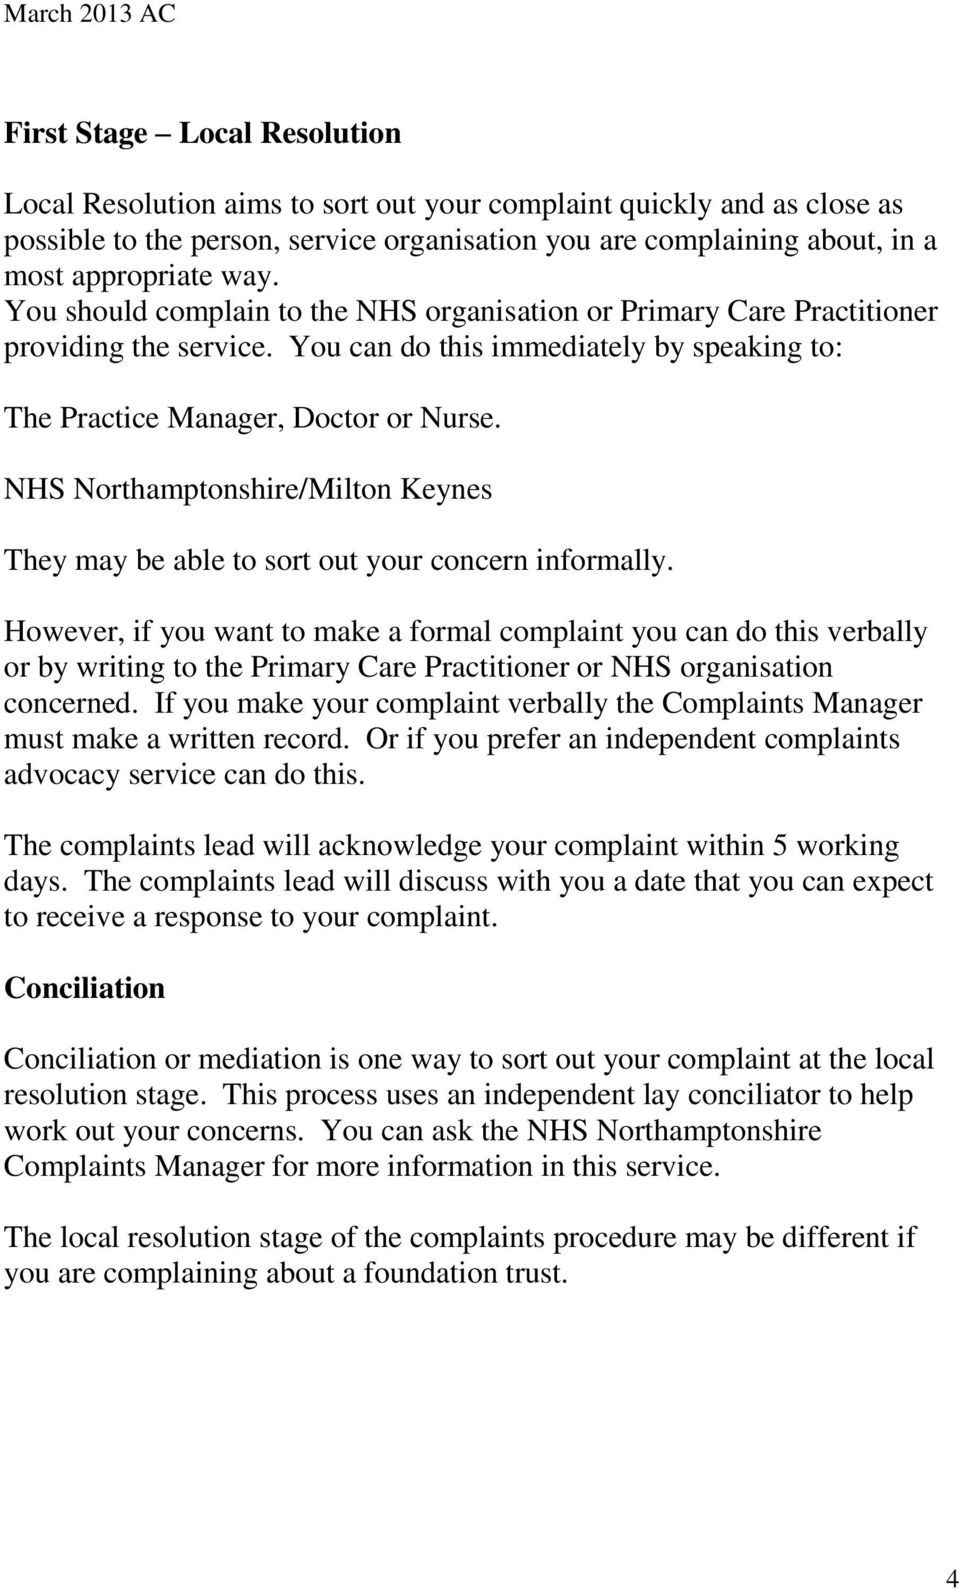 NHS Northamptonshire/Milton Keynes They may be able to sort out your concern informally.